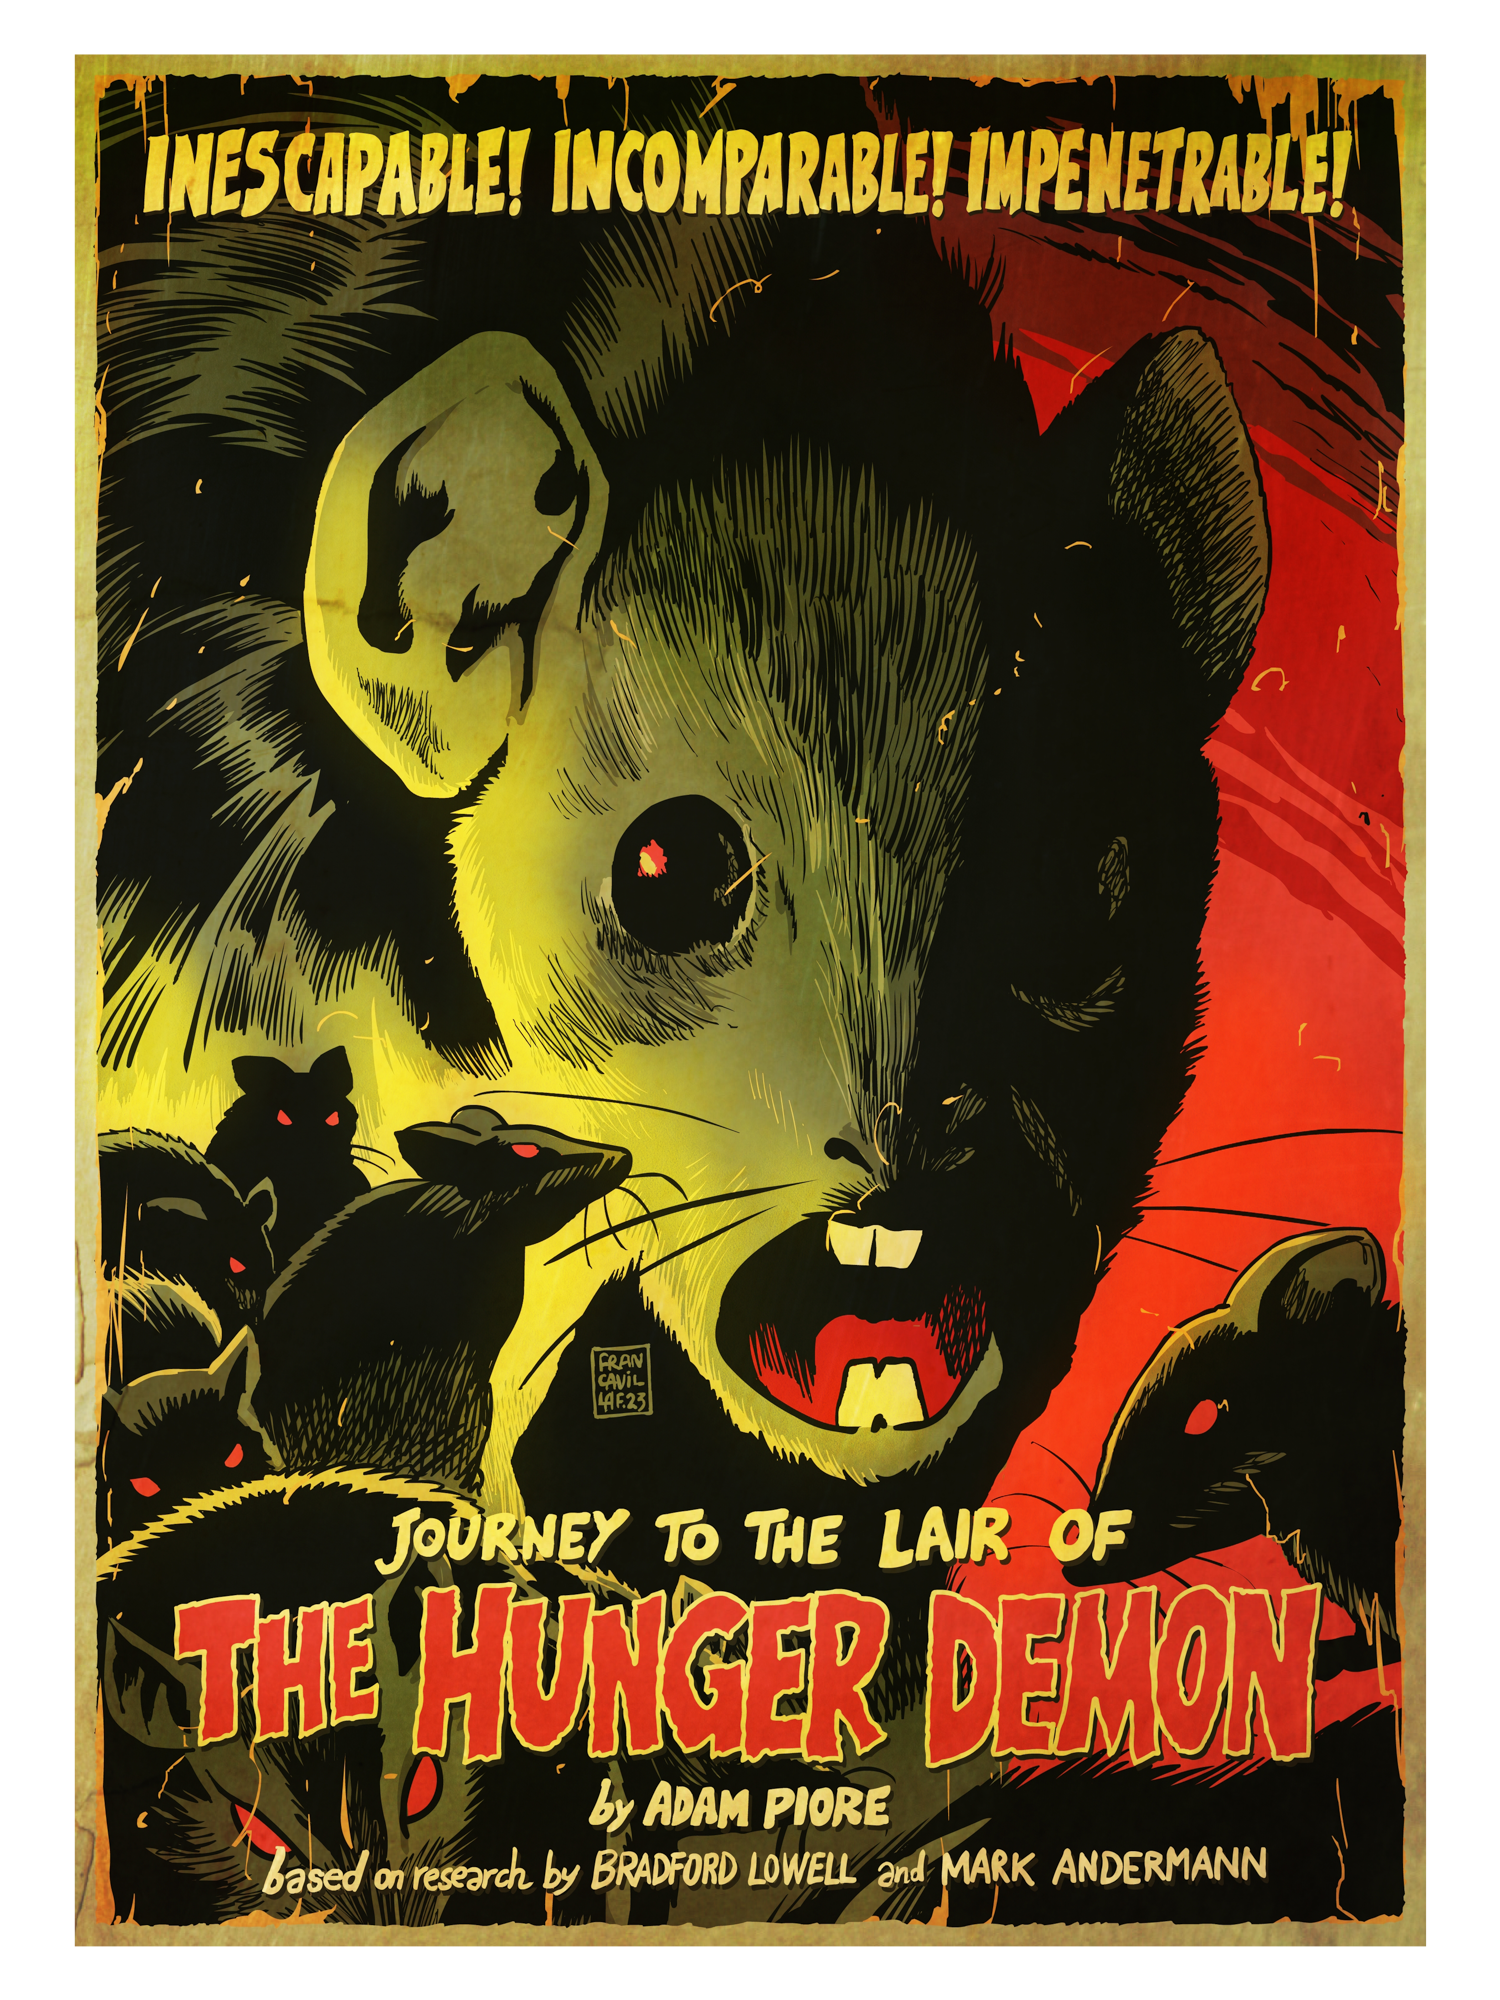 a comic movie poster style image of a very large rodent and lots of smaller ones, with teaser text that reads, &quot;Inescapable! Incomparable! Impenetrable!&quot; across the top. Along the bottom is the title, &quot;Journey to the lair of the Hunger Demon by Adam Piore, based on research by Bradford Lowell and Mark Andermann.&quot;